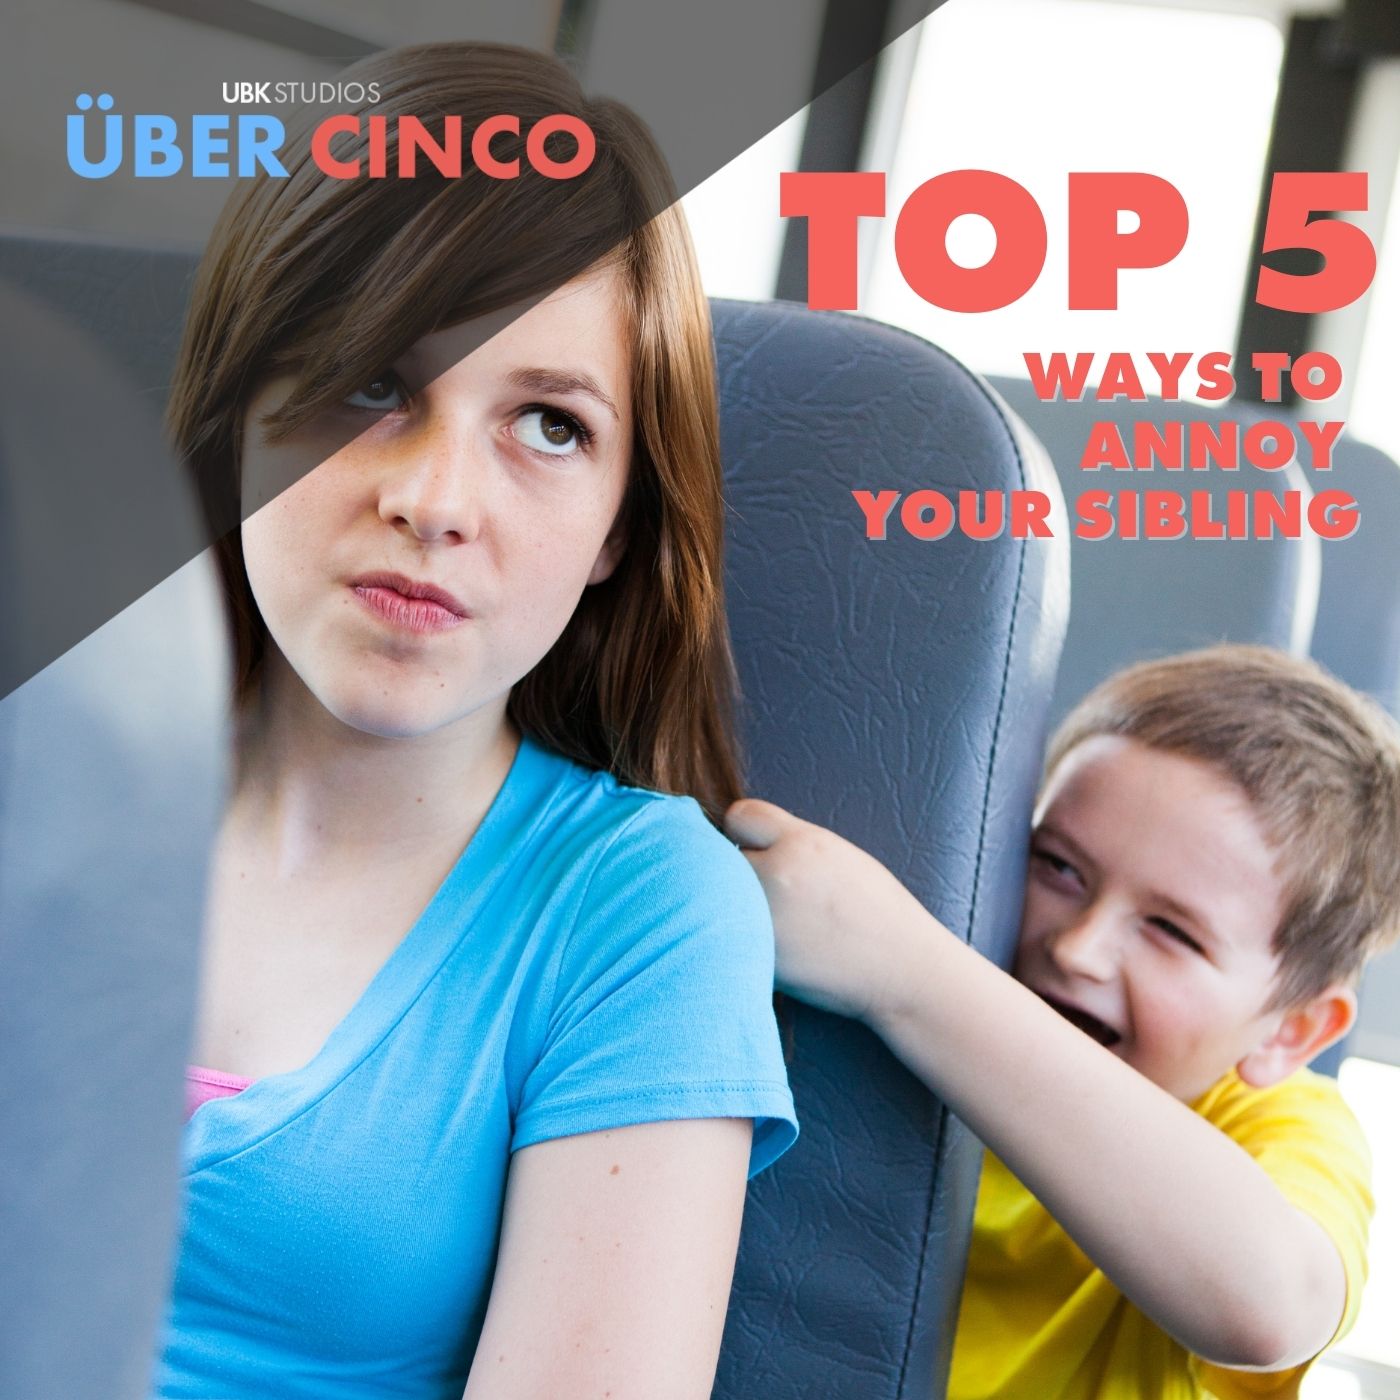 Top 5 Ways to Annoy Your Sibling Image